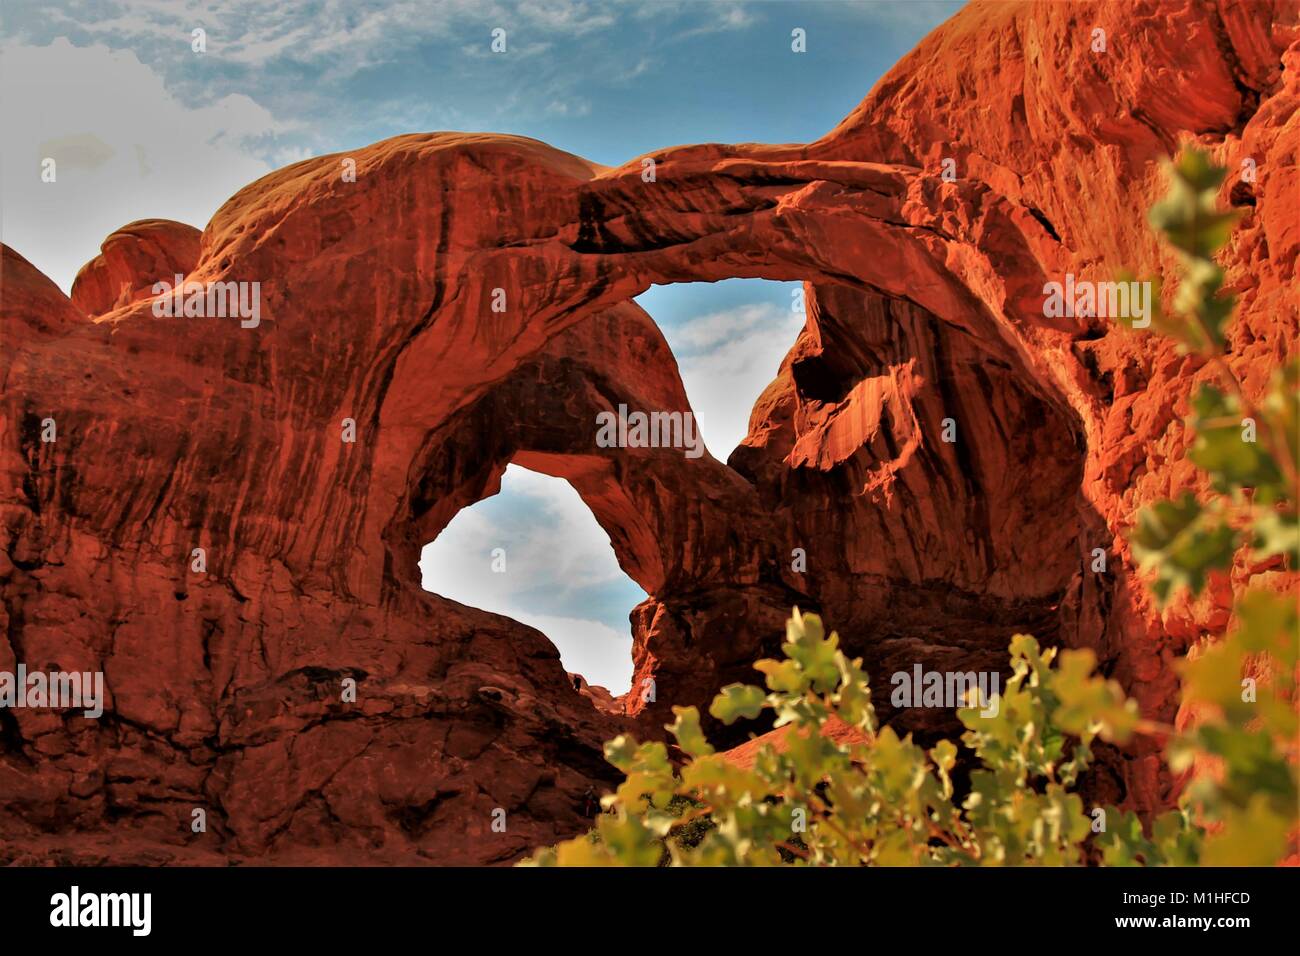 Arches National Park, Utah - land of beautiful red rock, amazing natural rock sculptures, hiking, photo ops, and jaw drops! Stock Photo